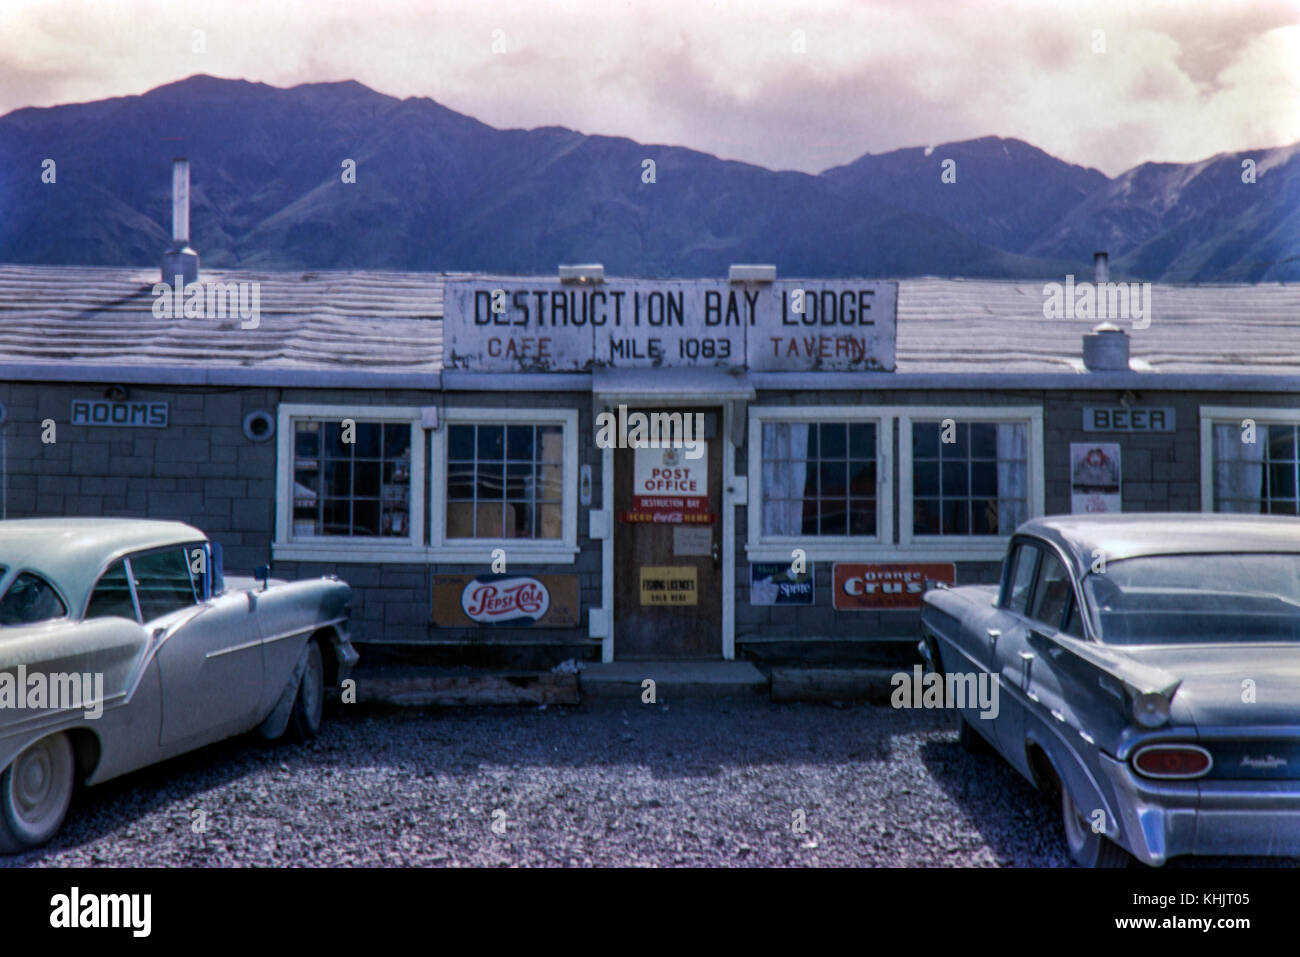 Destruction Bay Lodge in the Yukon YT, Canada. Image taken in August 1964 Stock Photo